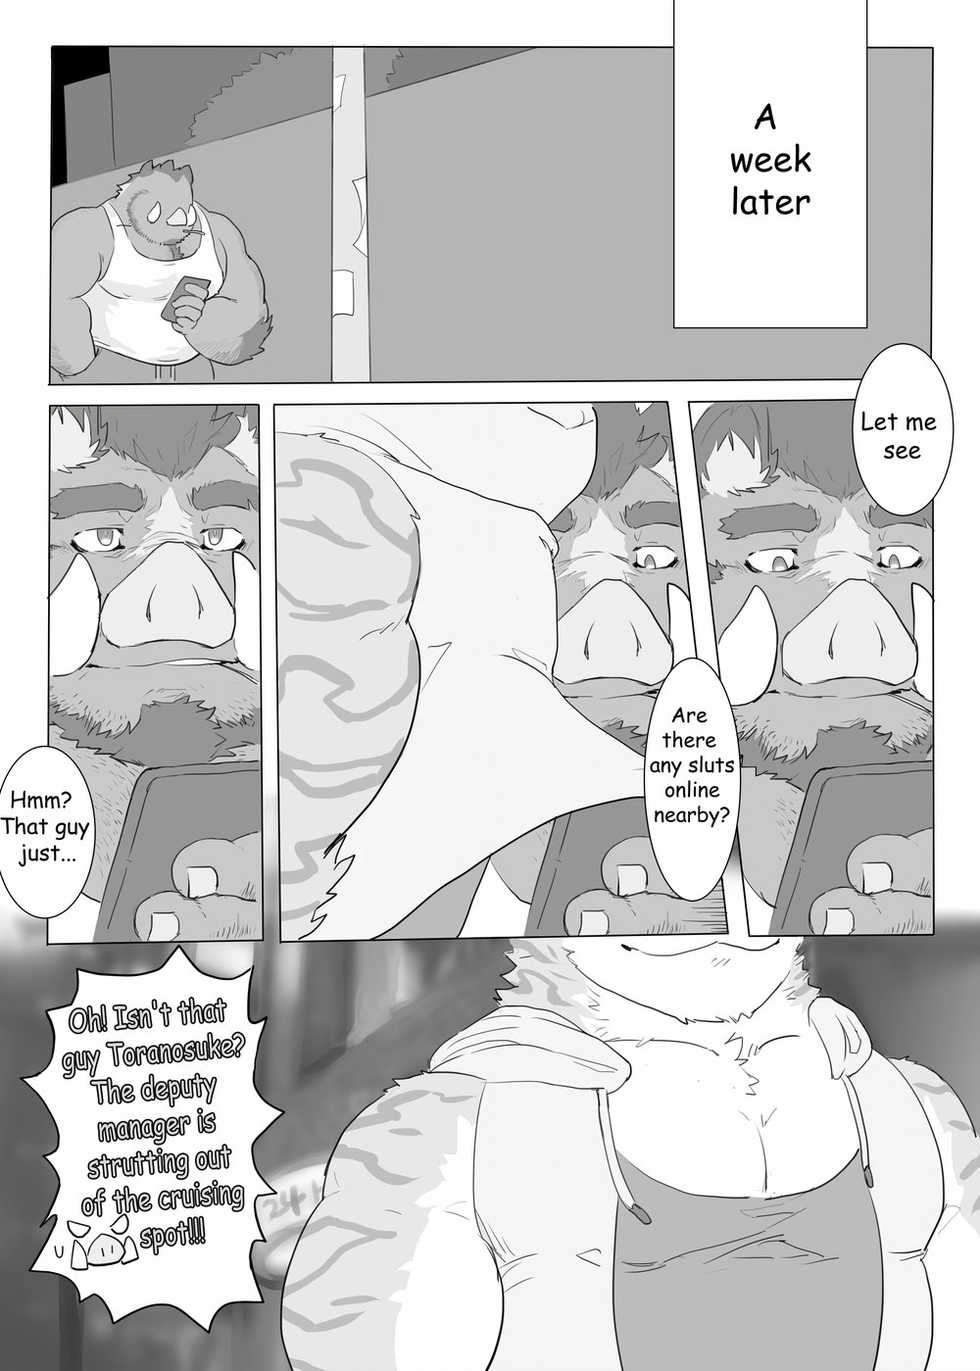 [Renoky] Encounter on Construction site [English] [Digital] - Page 9